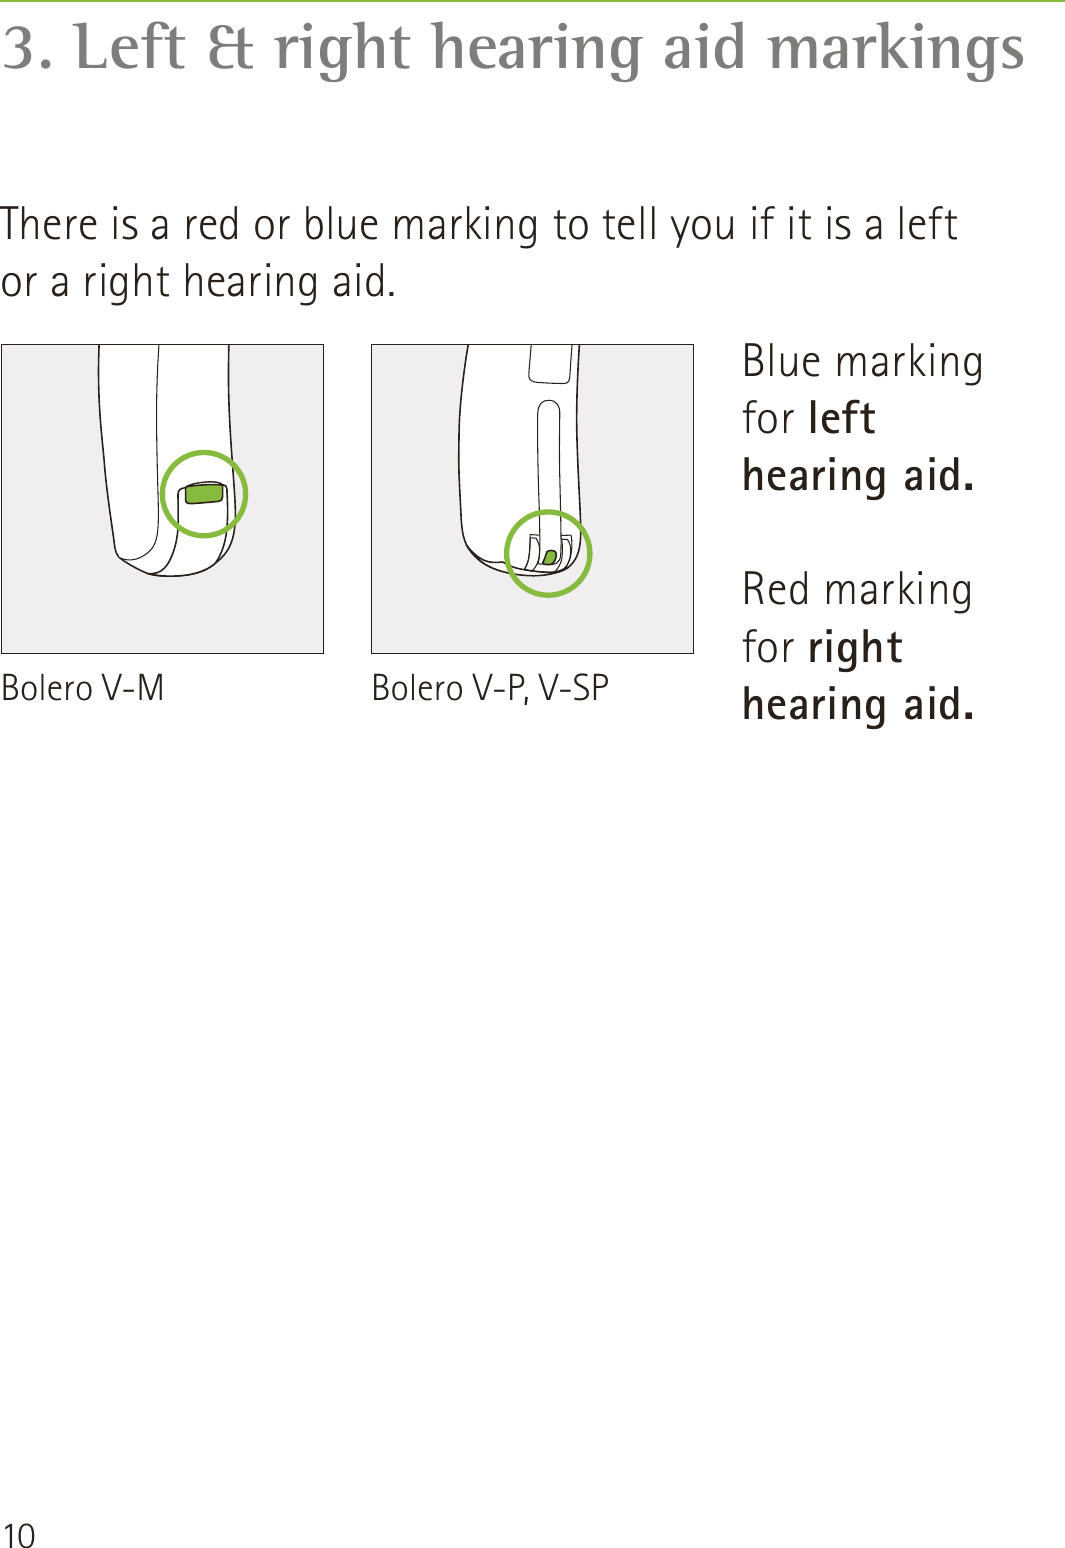 103. Left &amp; right hearing aid markingsThere is a red or blue marking to tell you if it is a left or a right hearing aid.Blue marking  for left hearing aid.Red marking  for right hearing aid.Bolero V-M Bolero V-P, V-SP